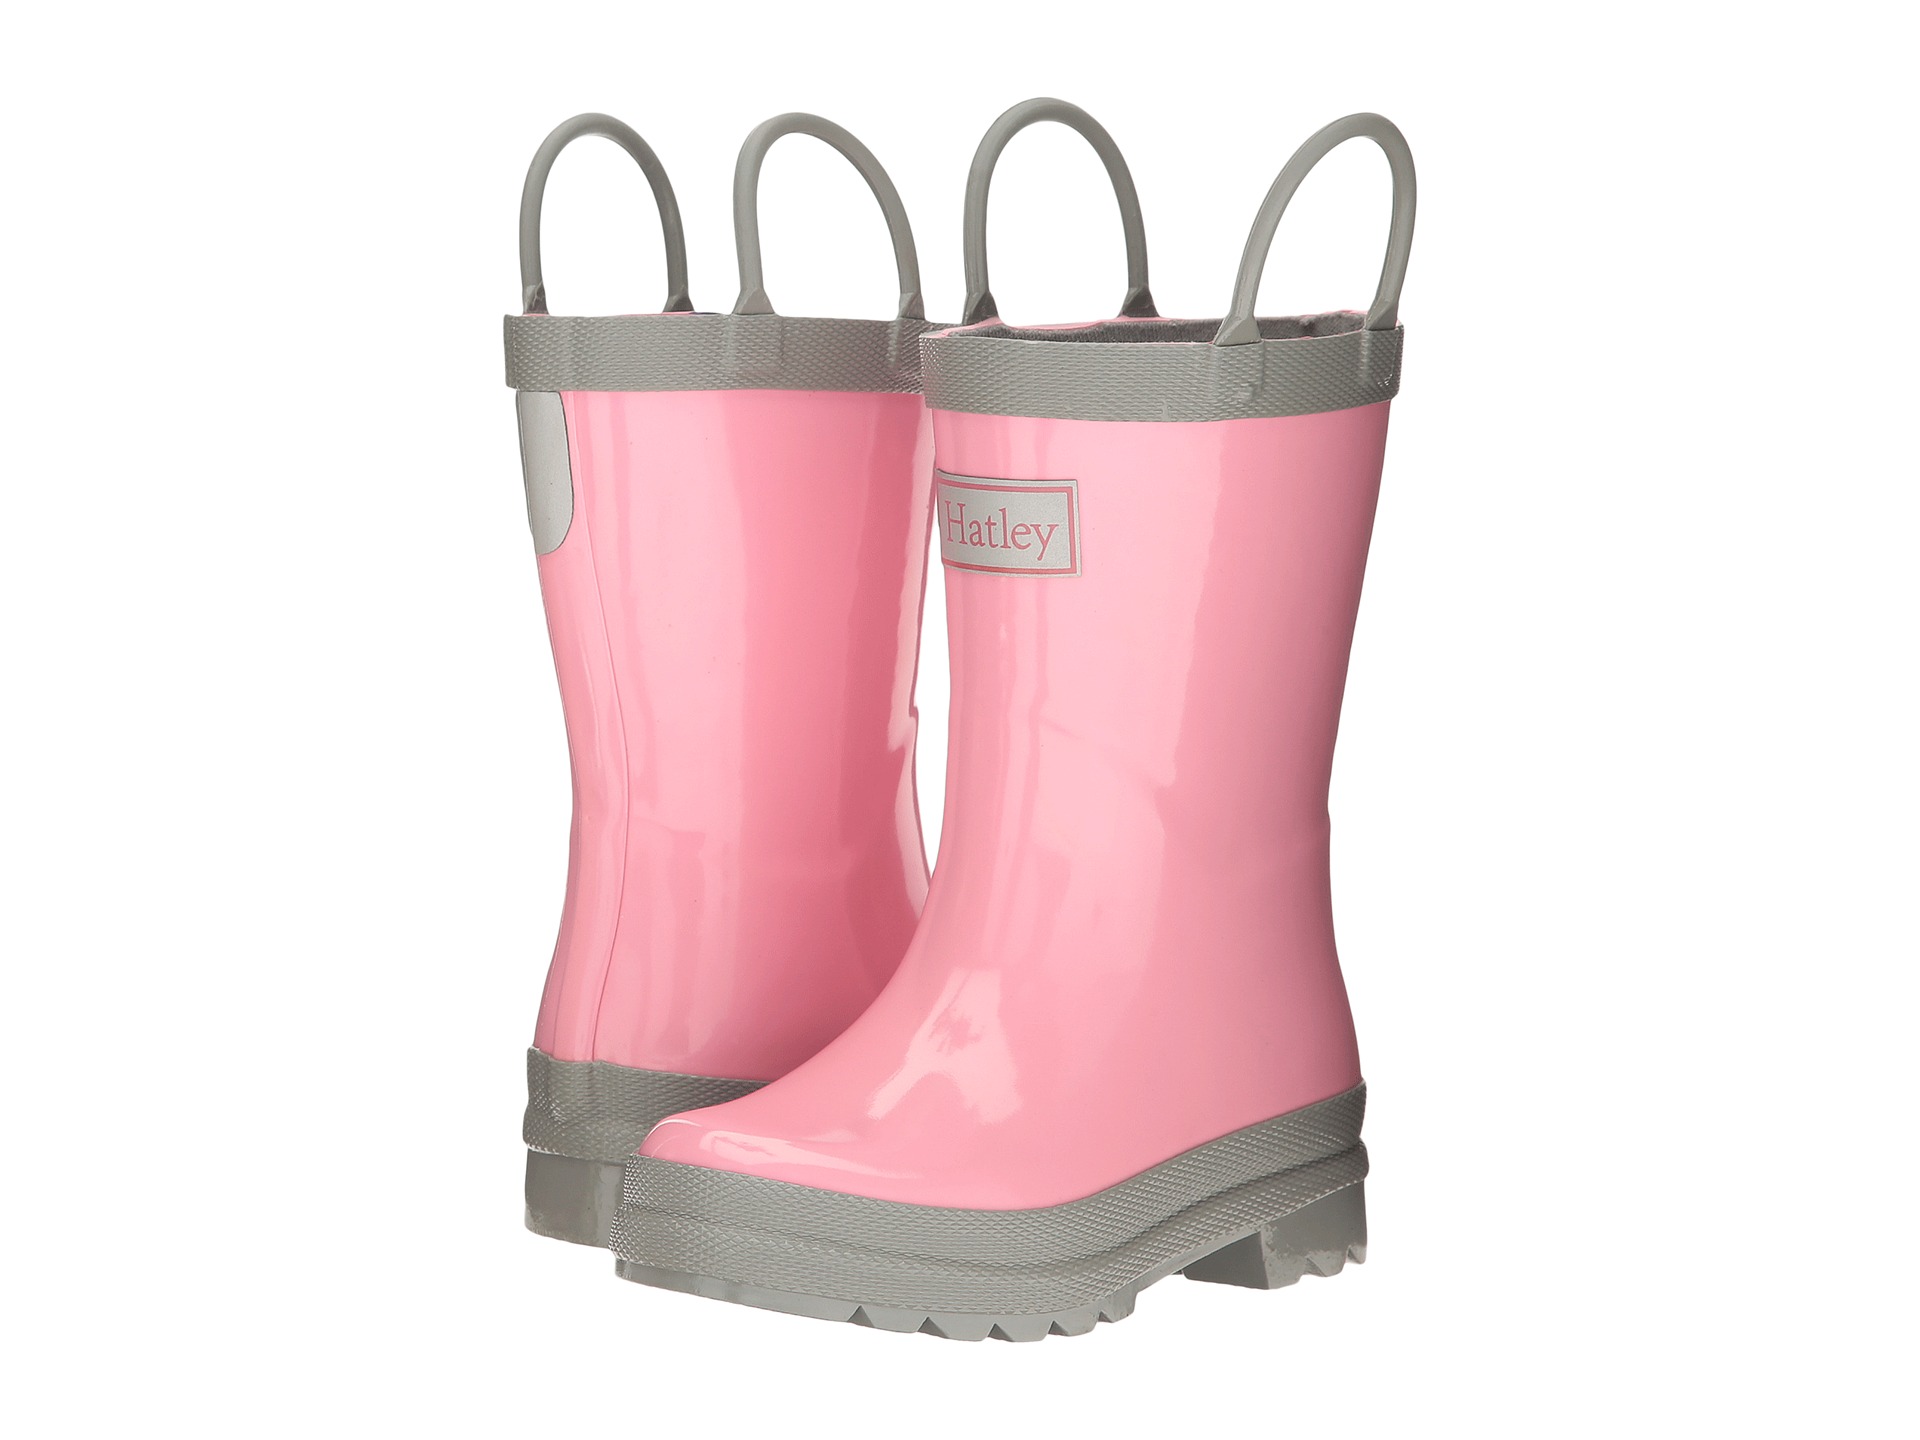 Hatley Kids Gray & Pink Rain Boots (Toddler/Little Kid) at Zappos.com